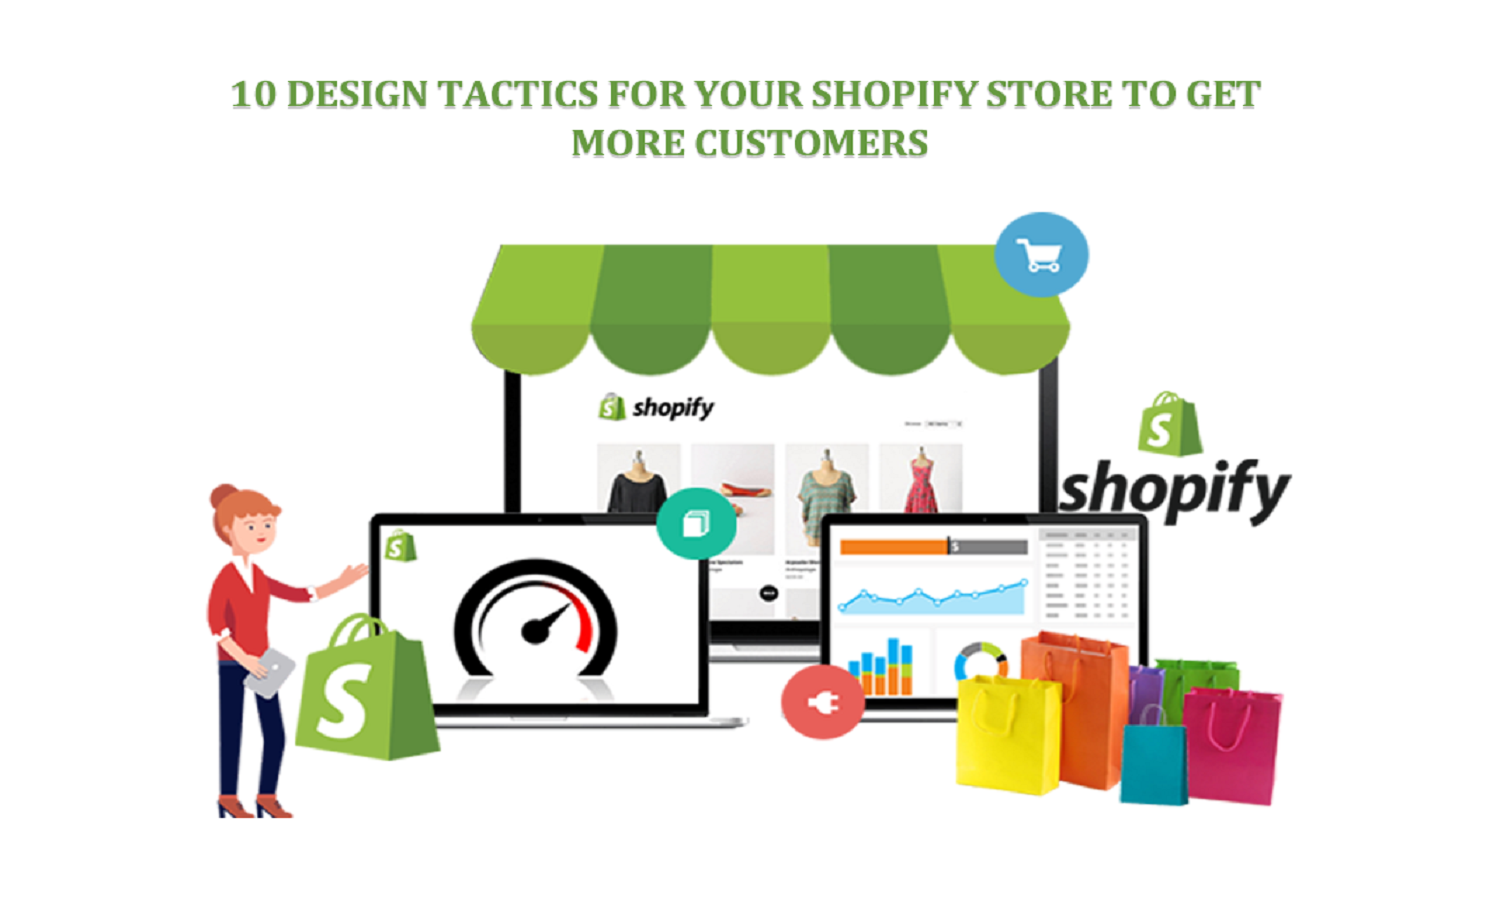 10 Design Tactics for Your Shopify Store to Get More Customers